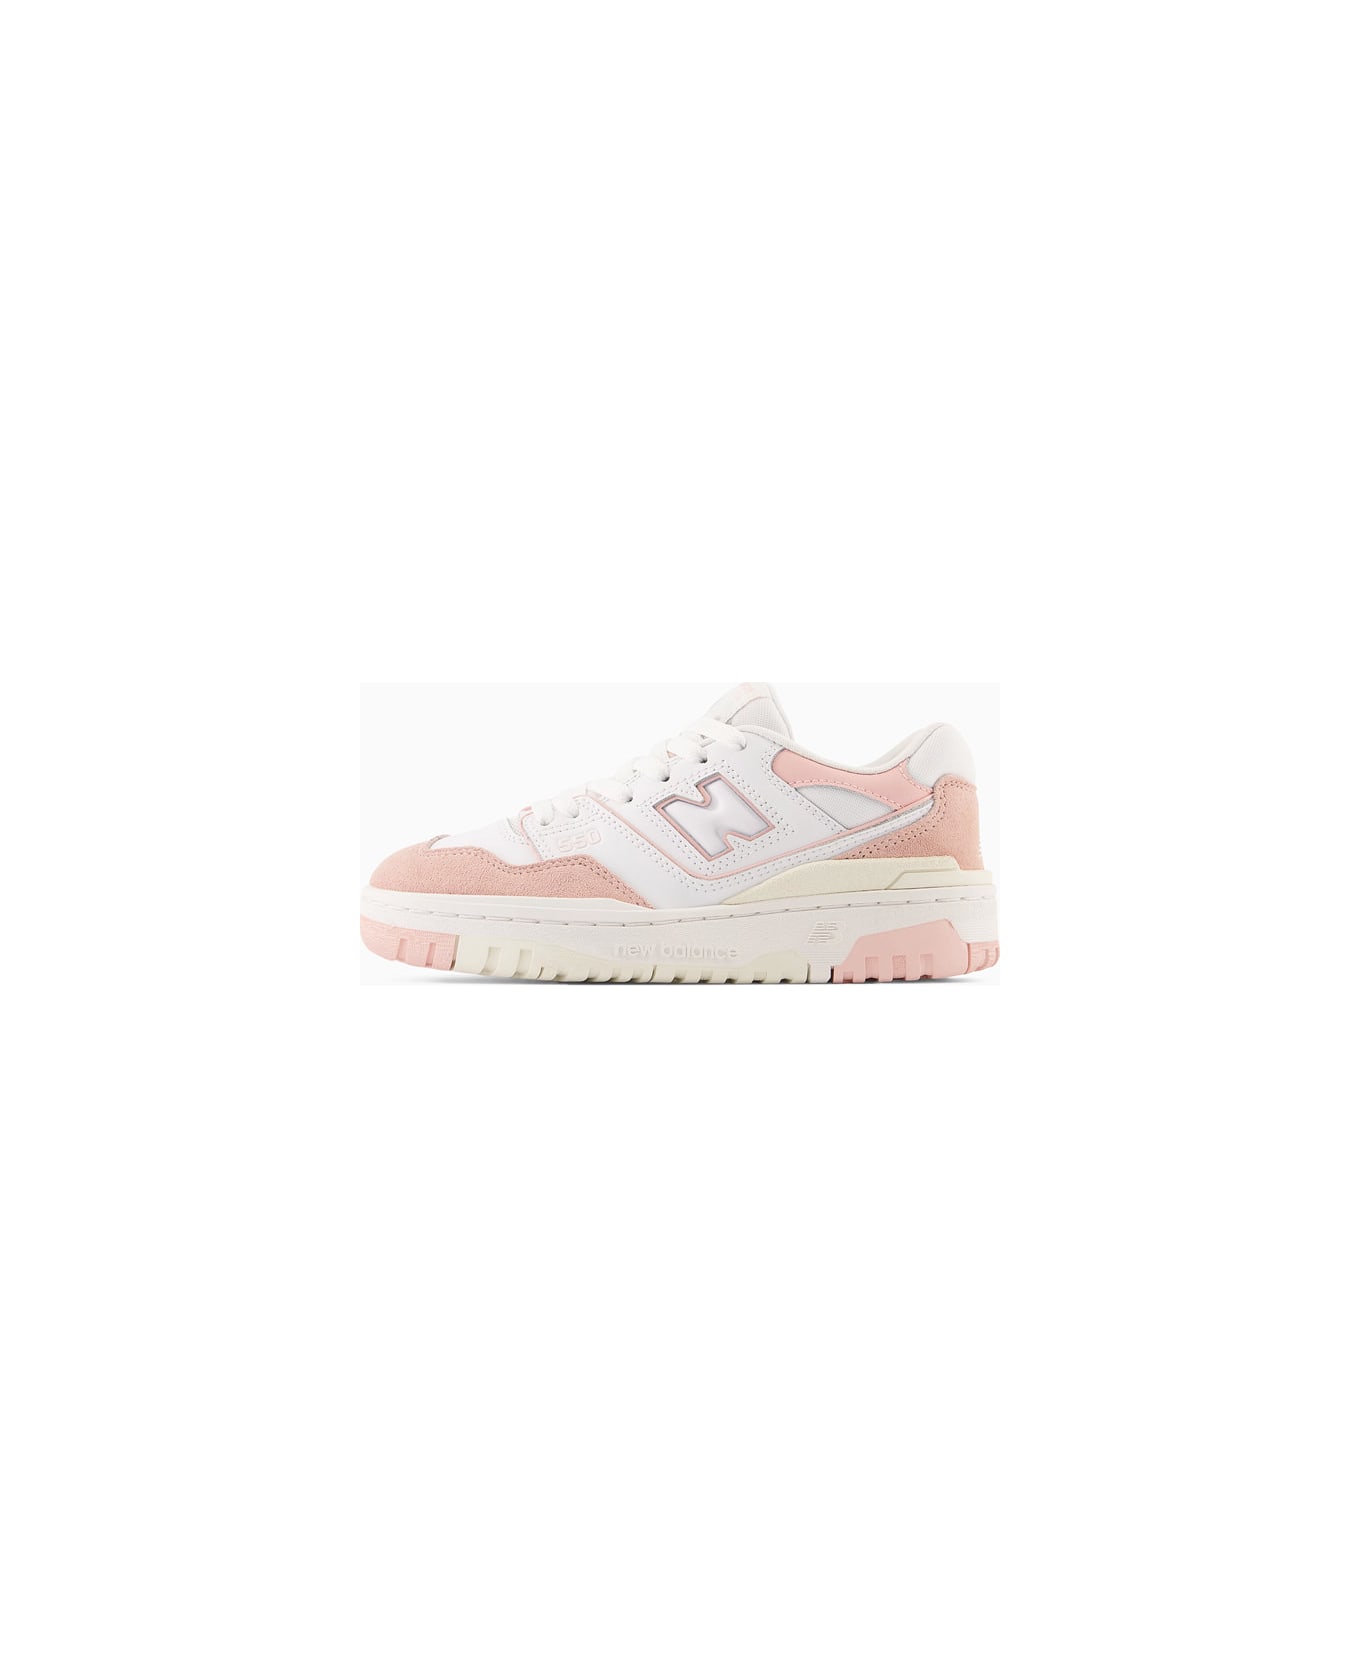 New Balance Sneakers Gsb550cd - Gs - WHITE/PINK シューズ